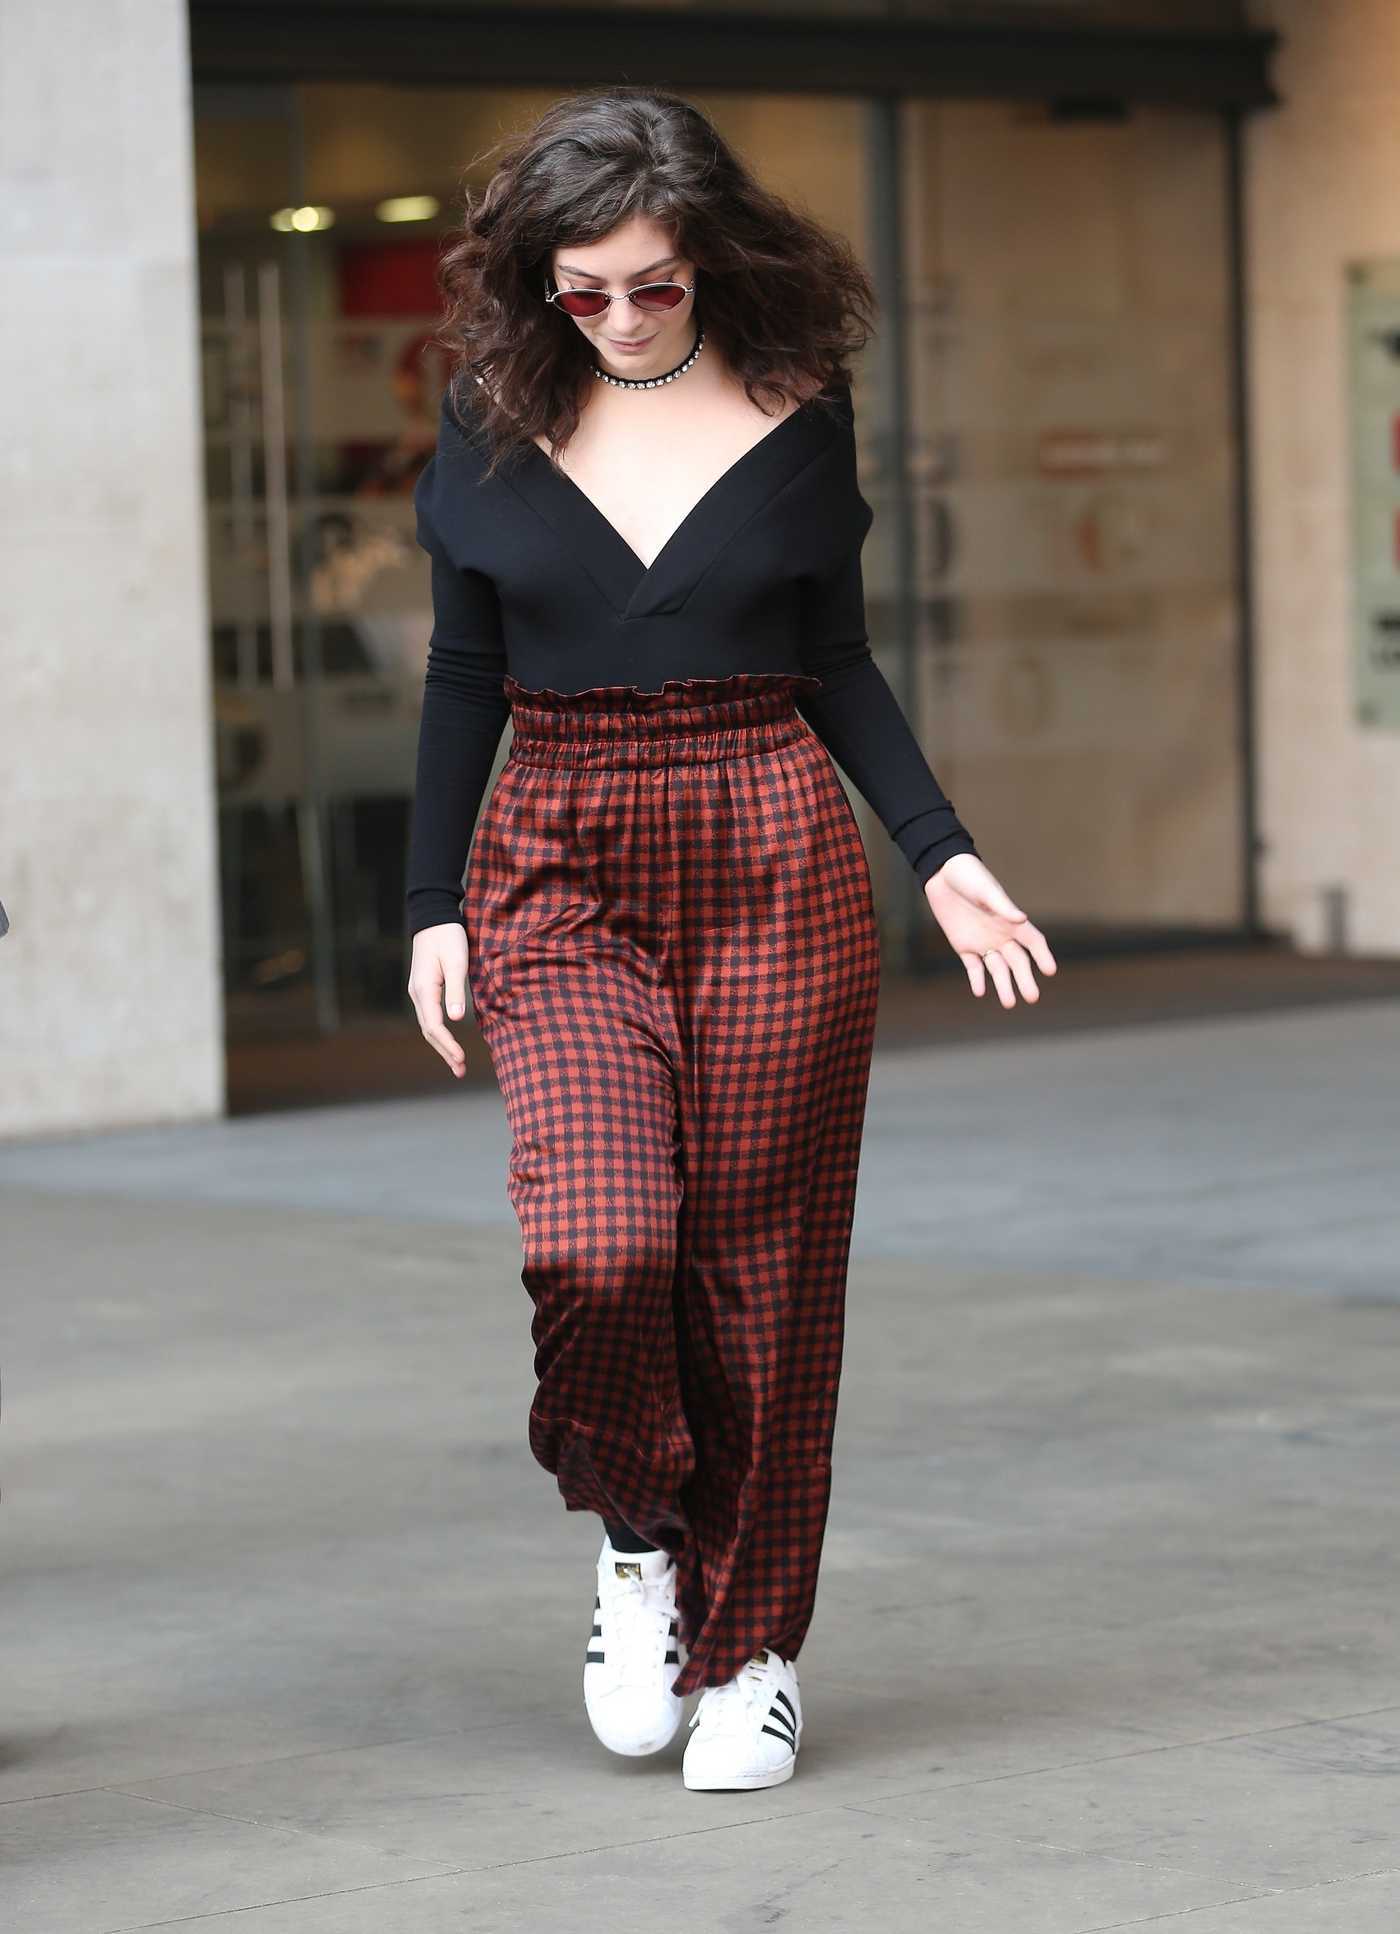 Lorde Arrives at the BBC Studios in London on the Nick Grimshaw Breakfast Radio Show 03/27/2017